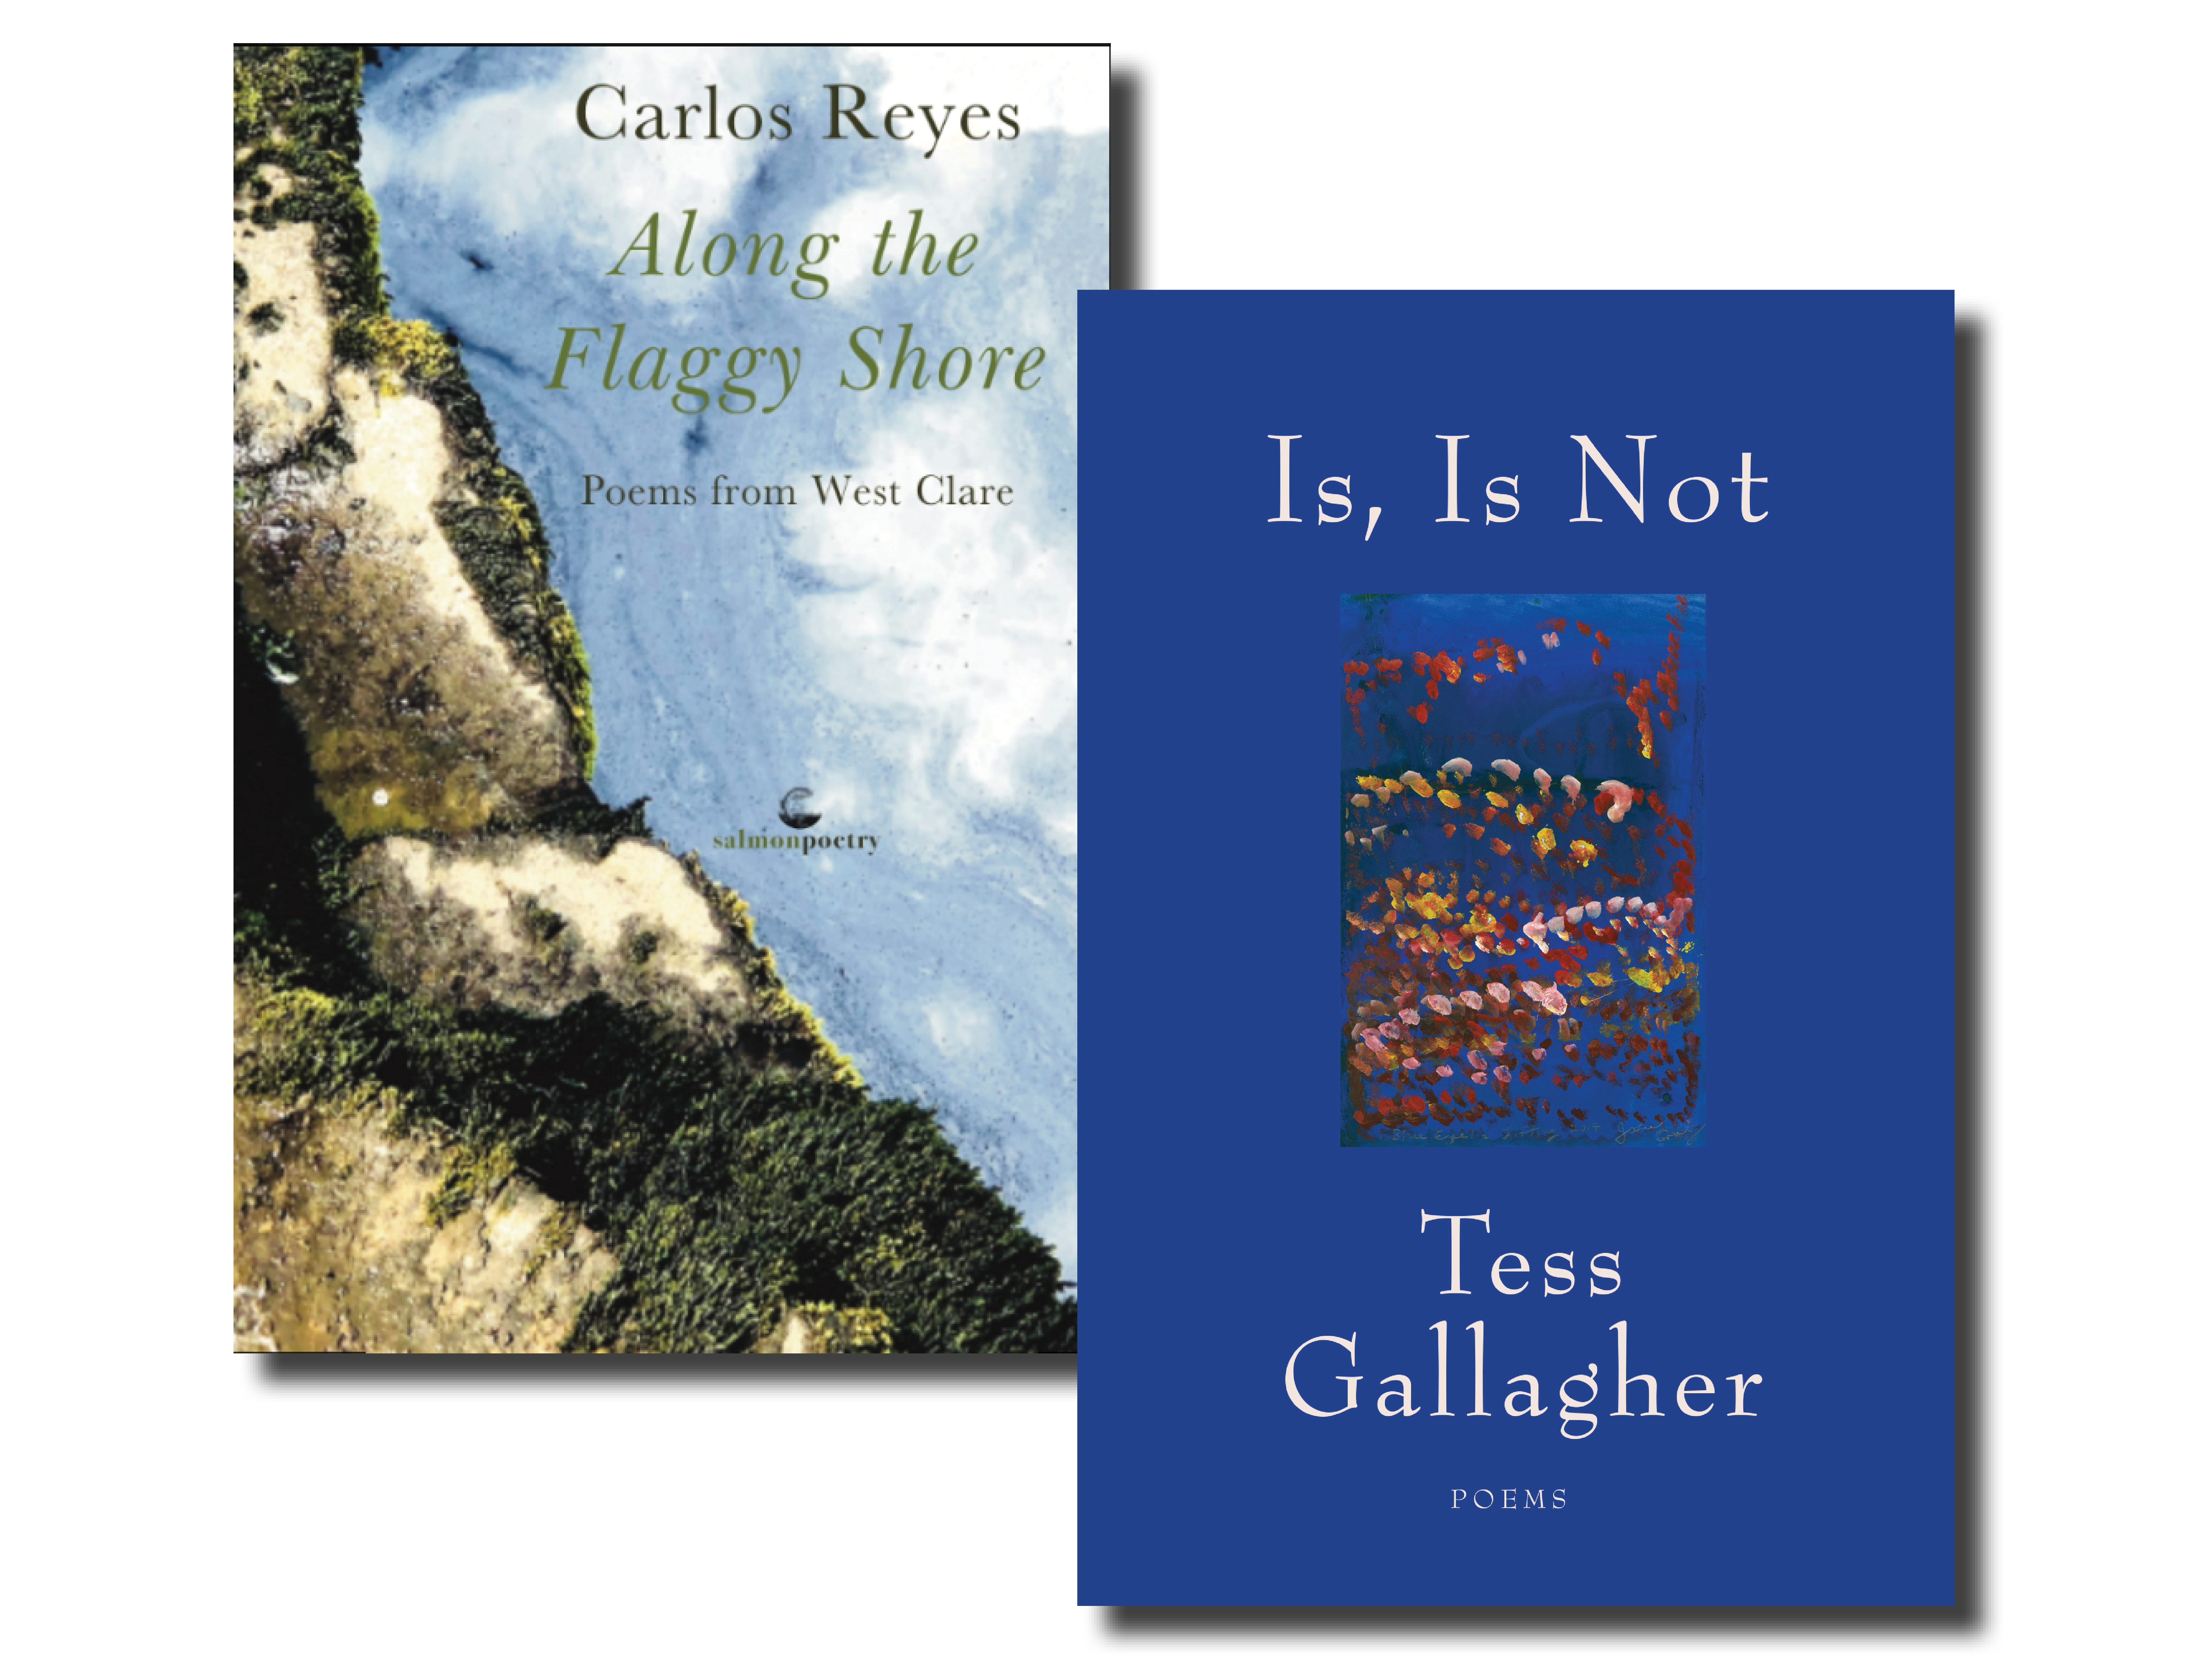 Two poetry books written by Tess Gallagher and Carlos Reyes